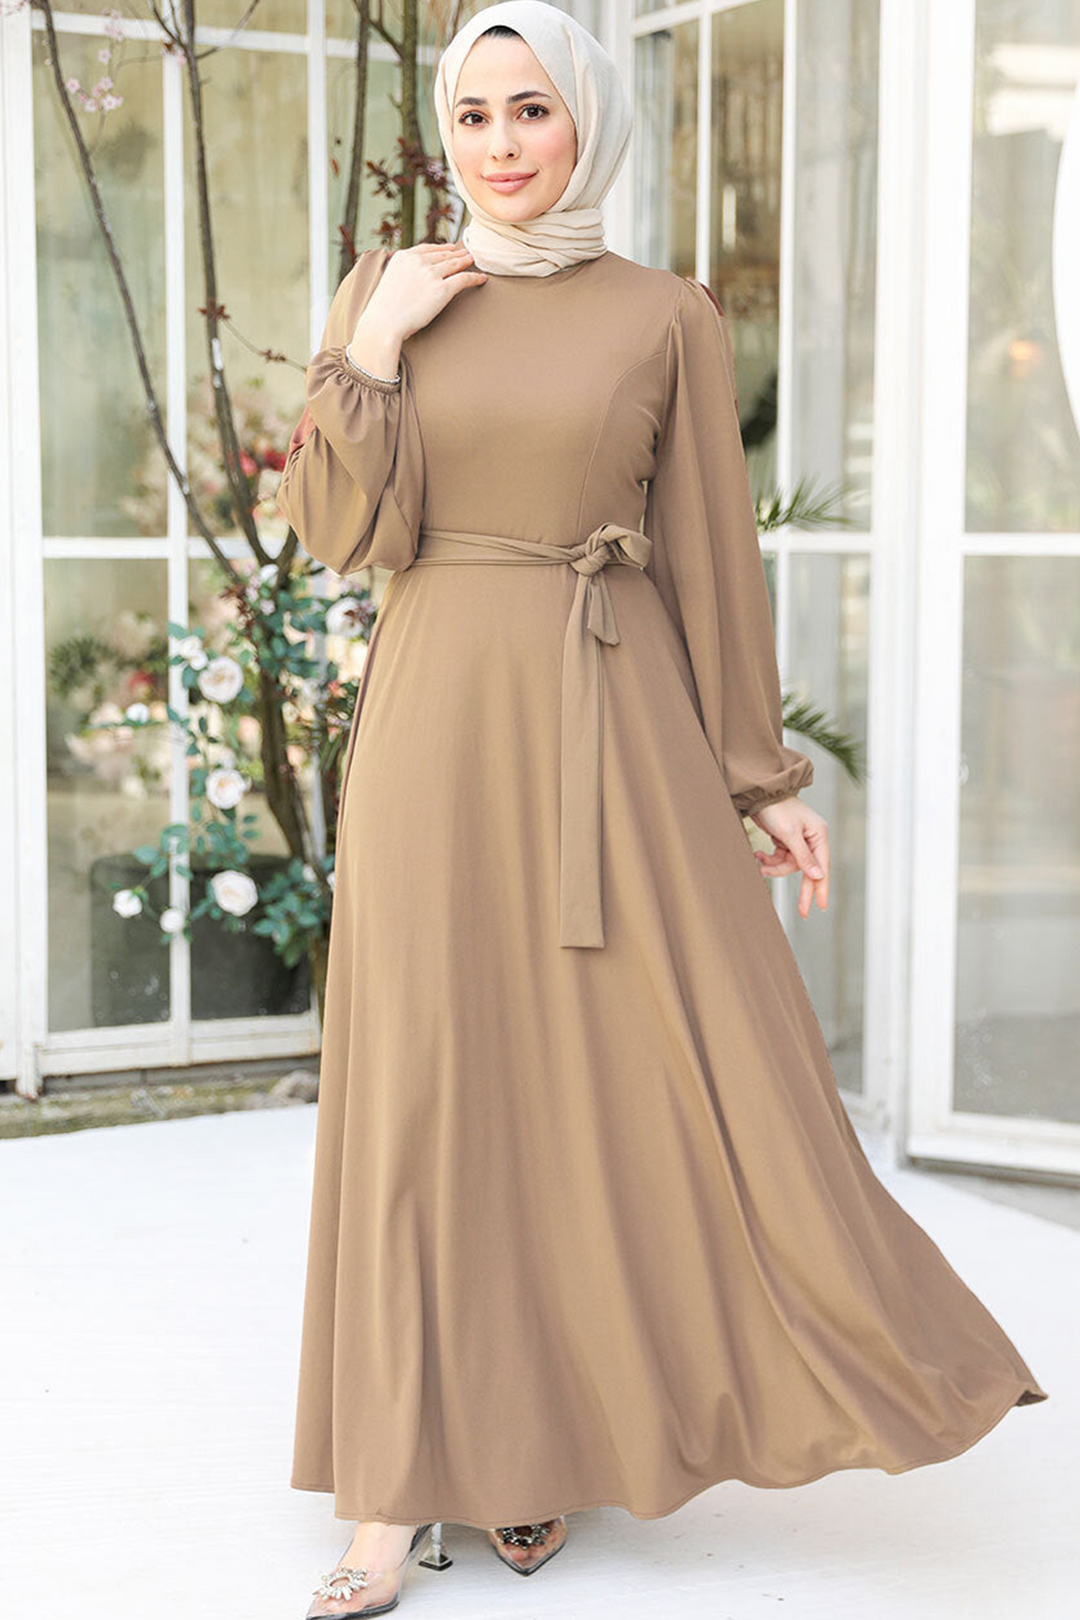 a woman wearing a brown dress with a hijab